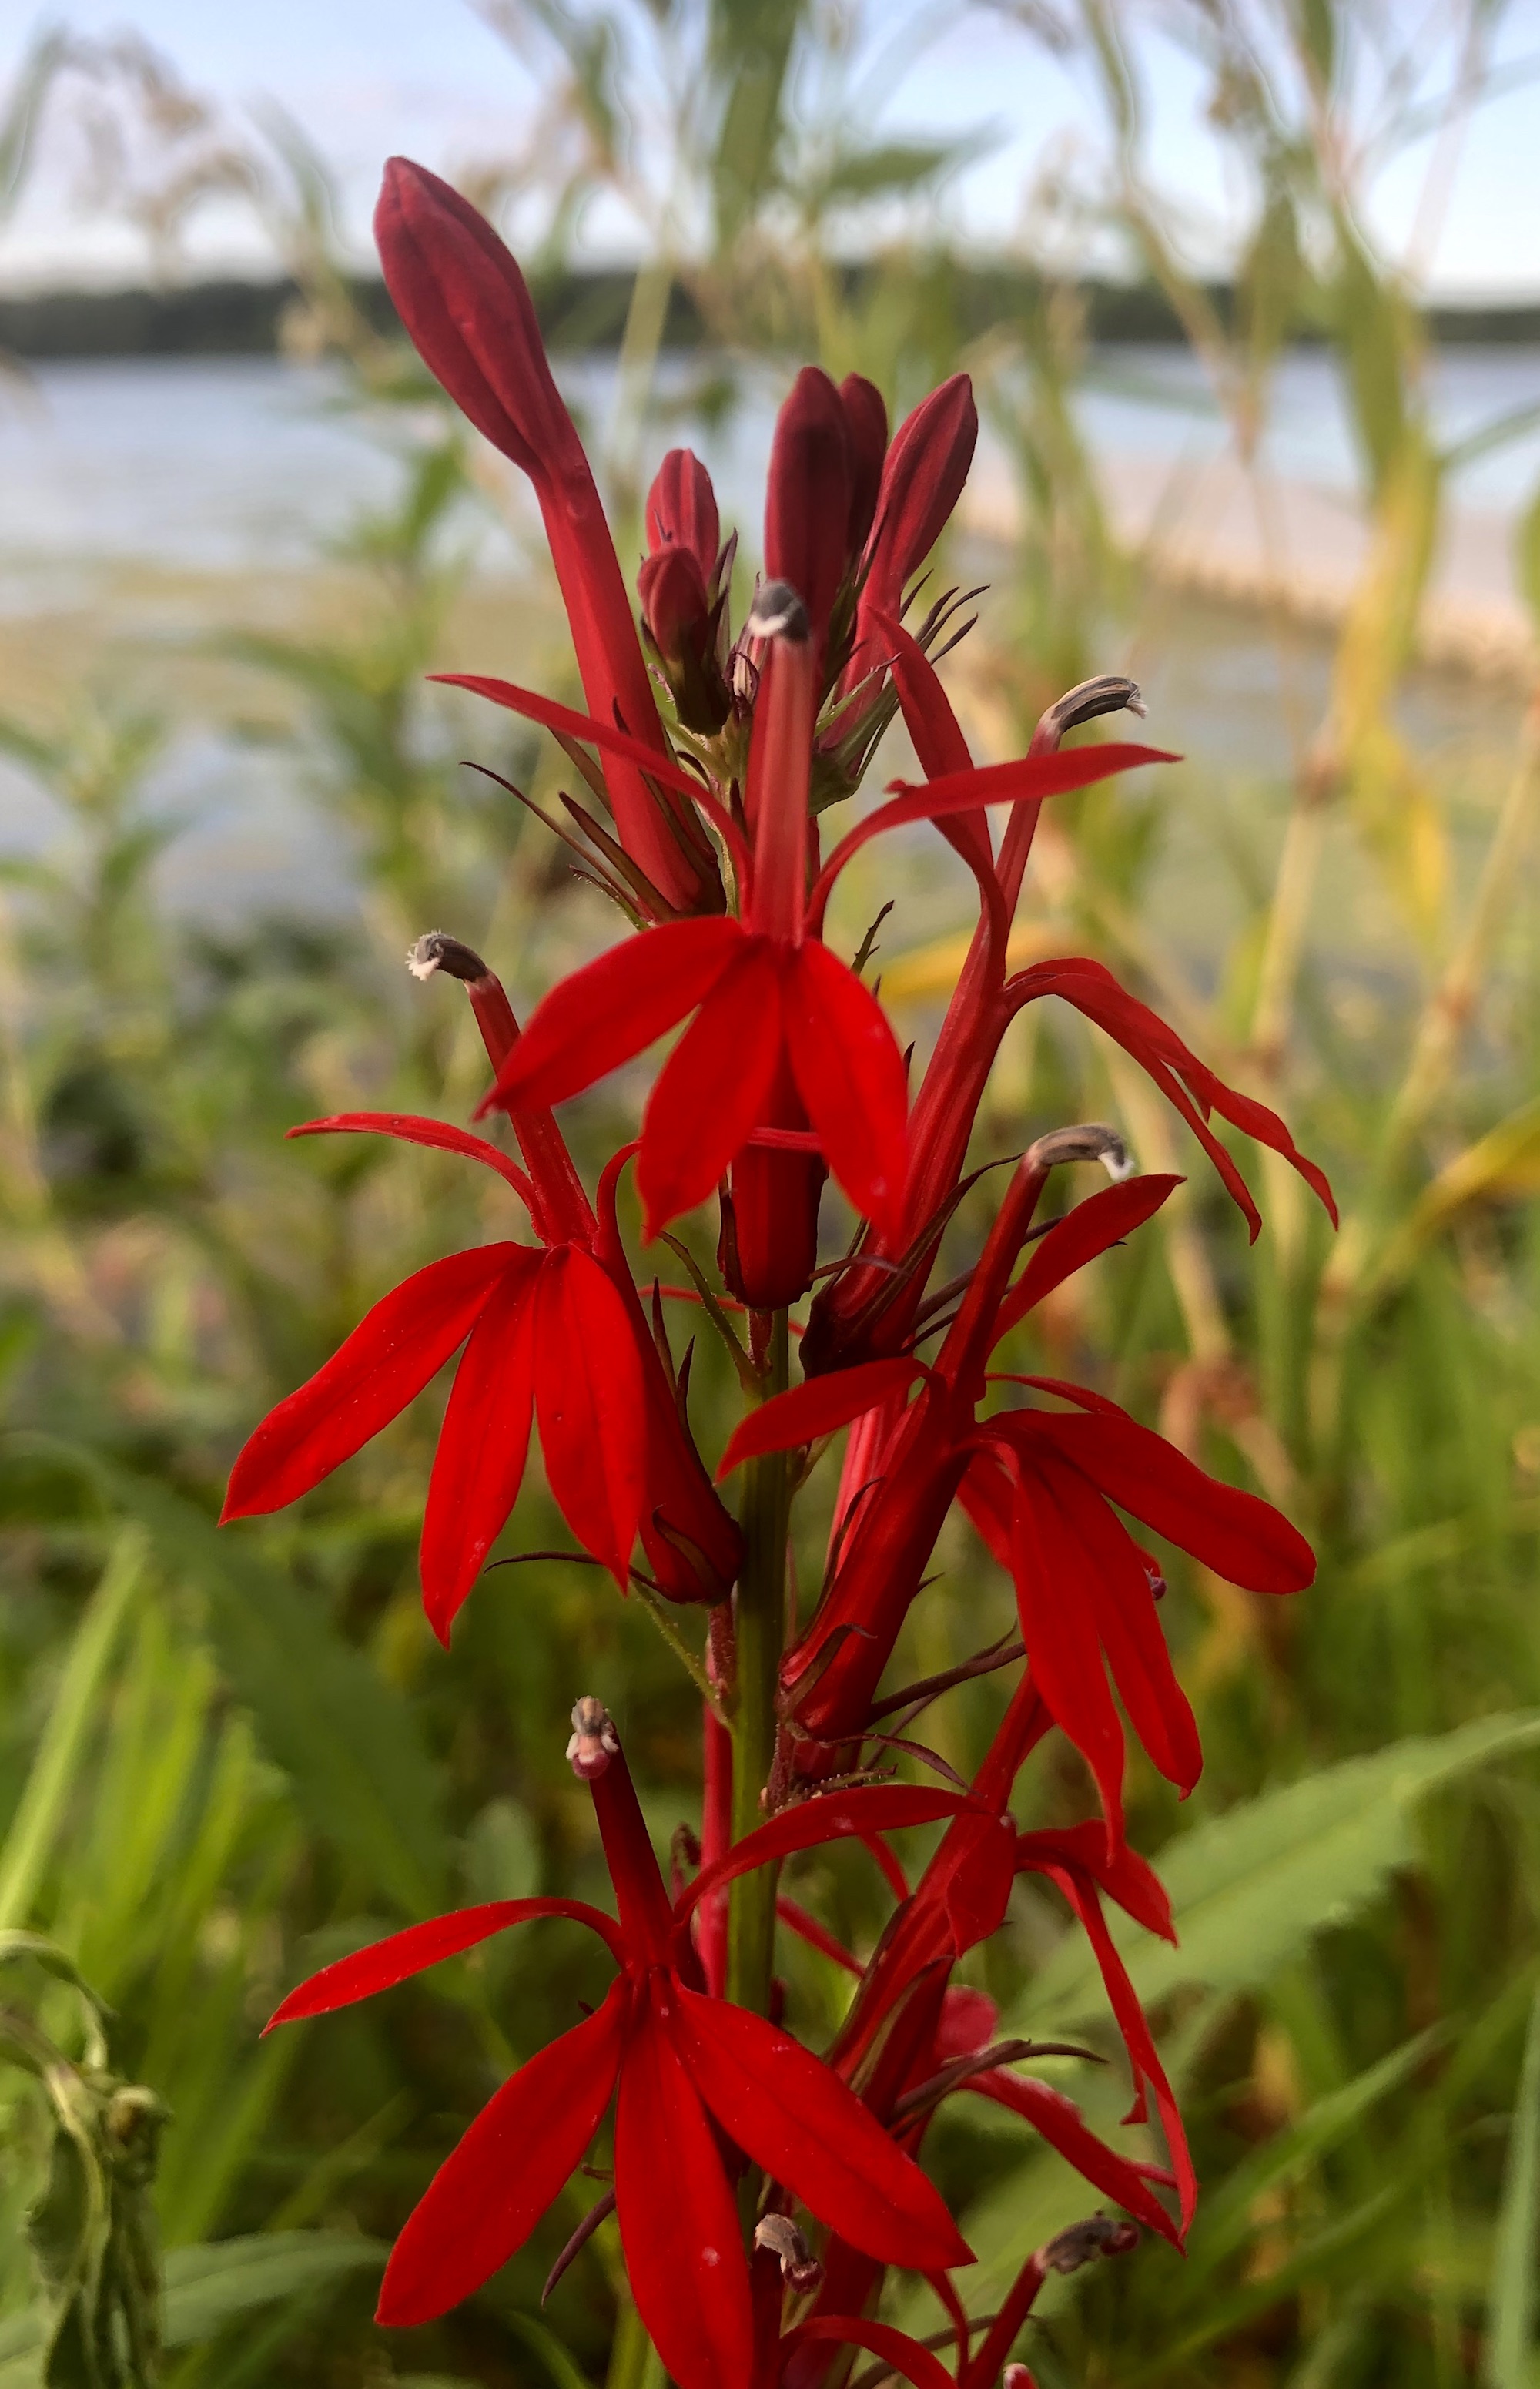 Cardinal Flower on shore of Lake Wingra in Wingra Park in Madison, Wisconsin on August 23, 2019.